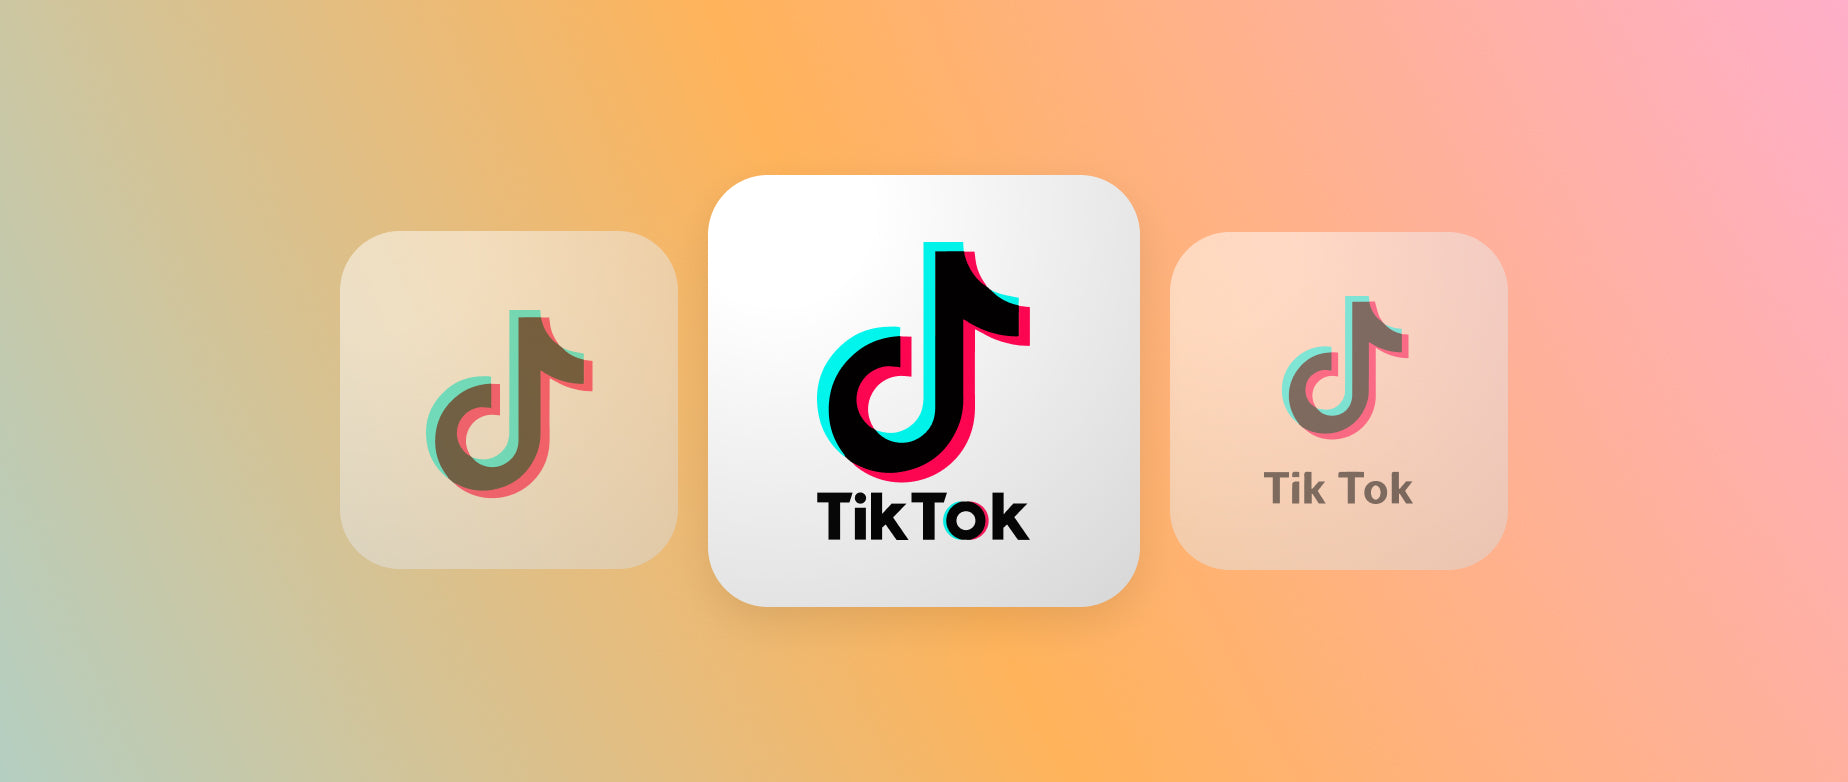 good looks meaning in text｜TikTok Search